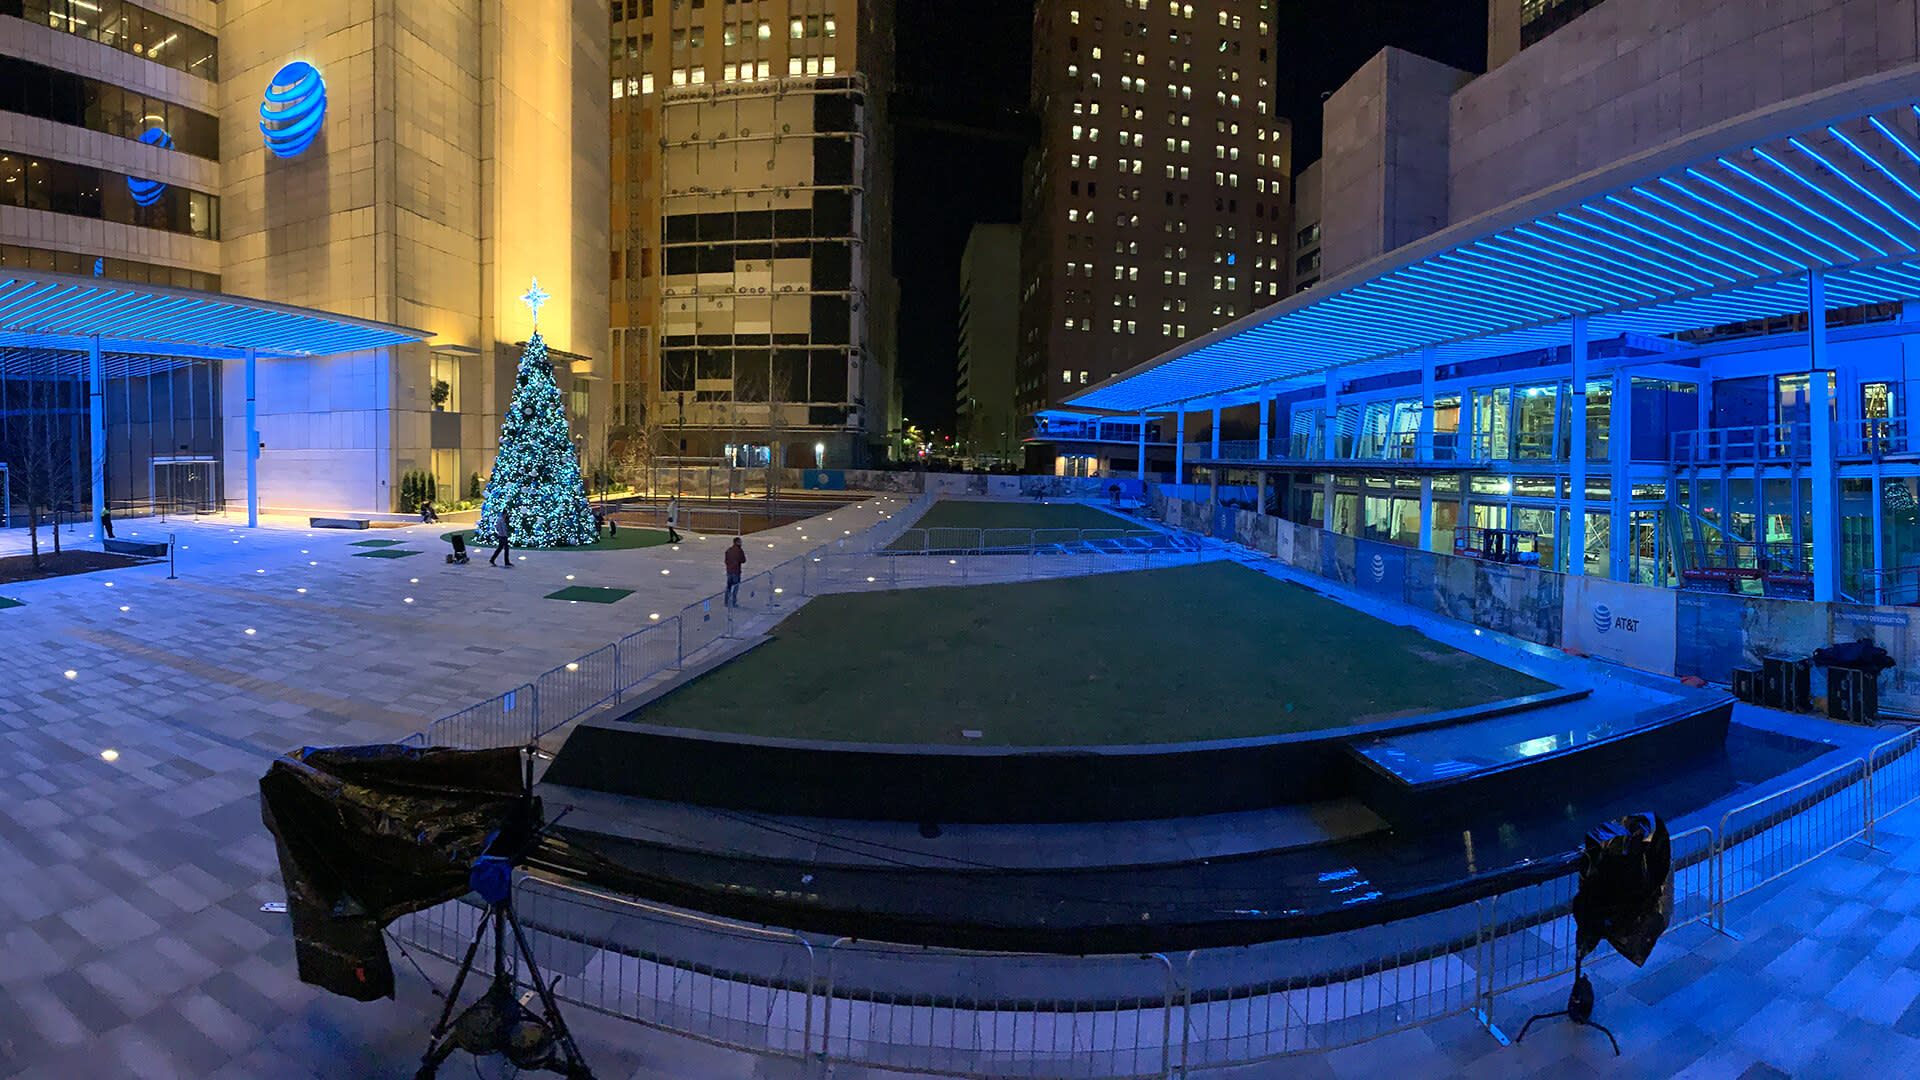  at&t building's plaza